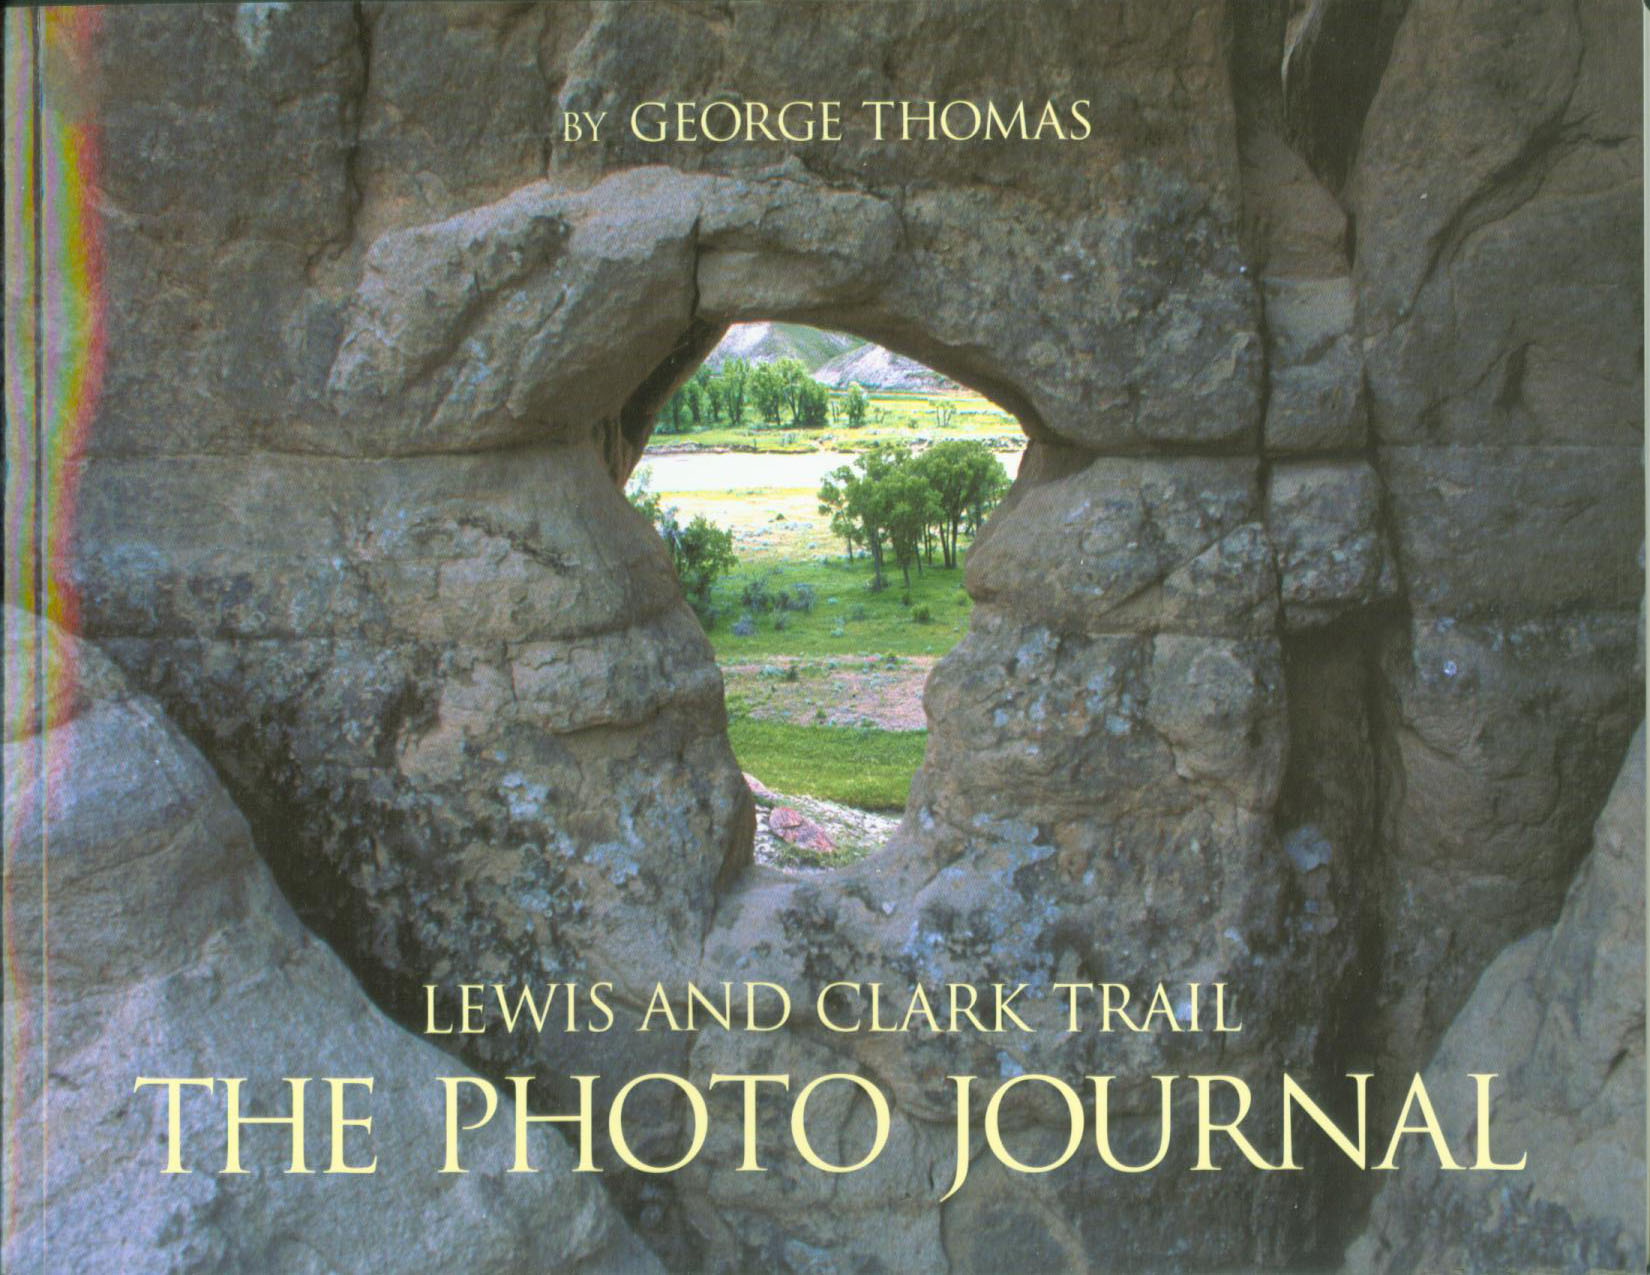 LEWIS AND CLARK TRAIL: the photo journal.